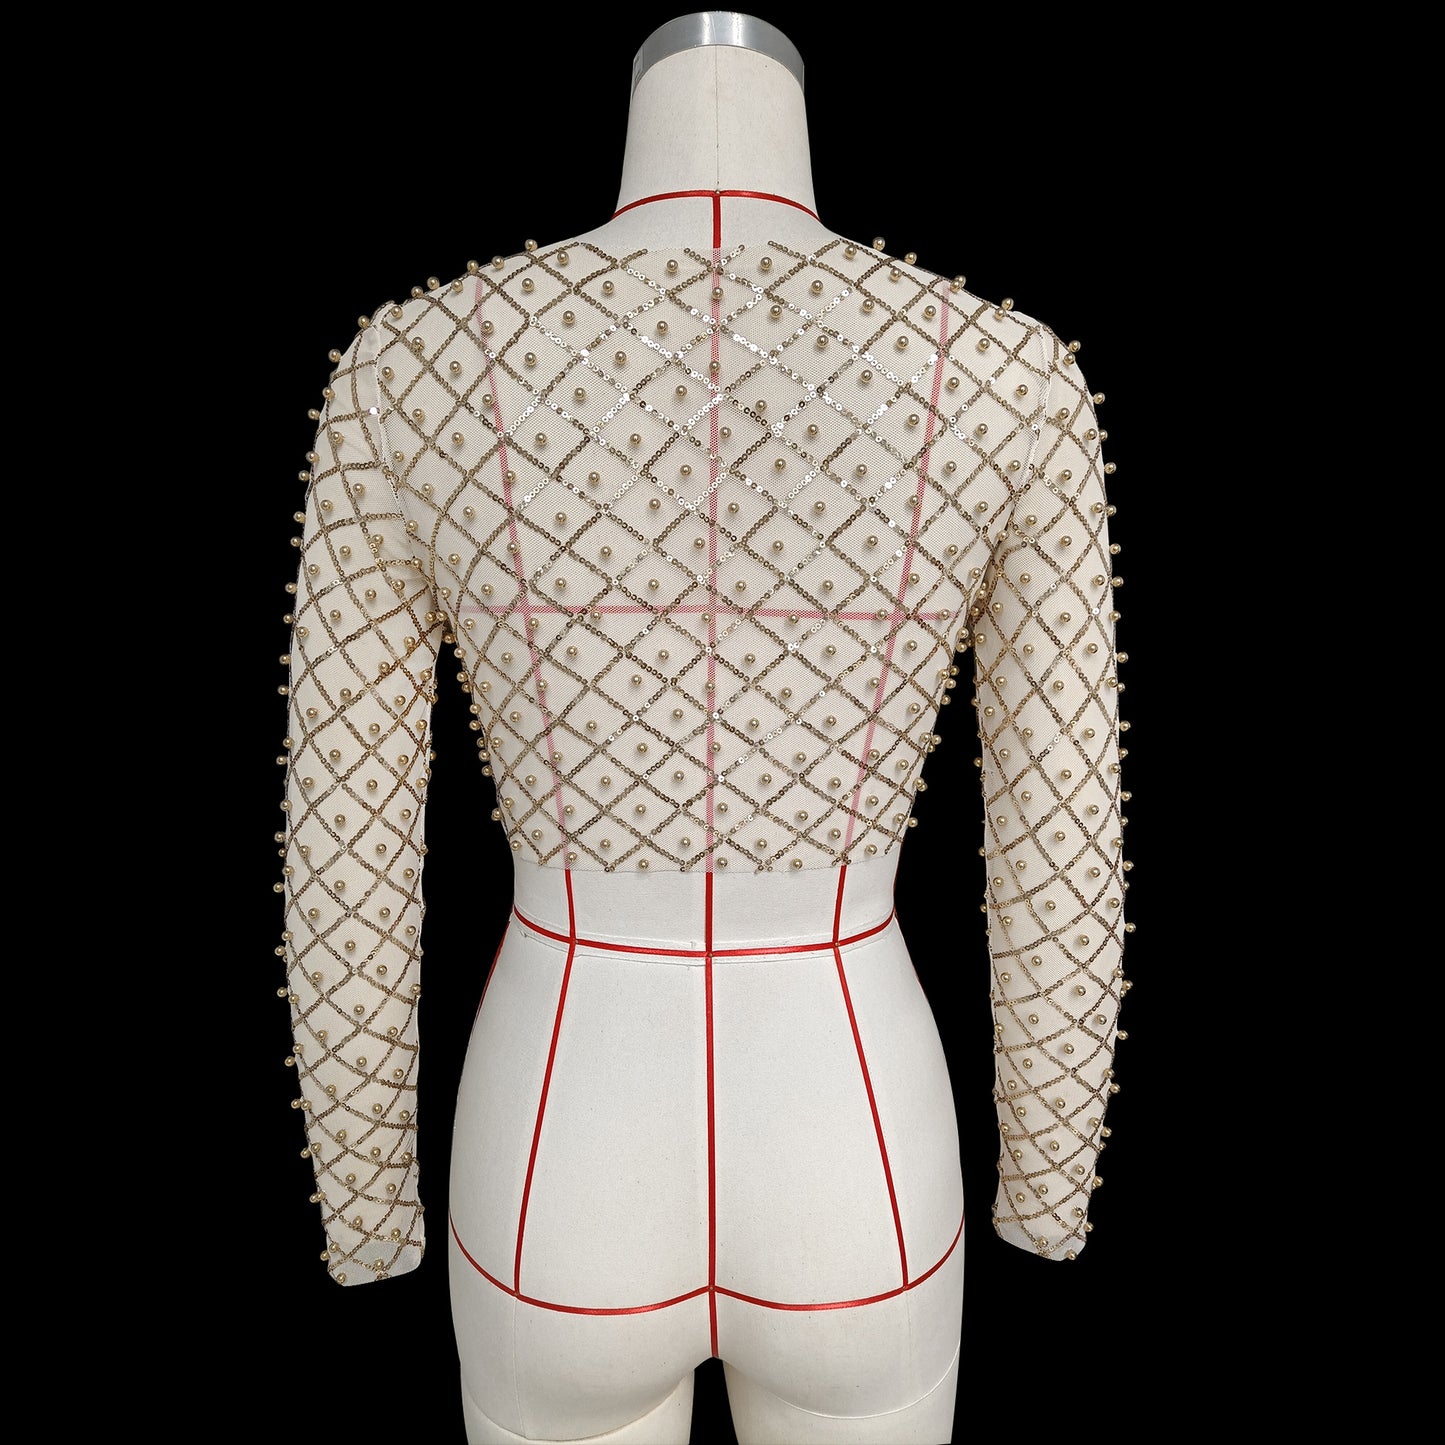 A back view of a mannequin showcases the Maramalive™ Mesh Studded Sequin Long-sleeved Shirt crafted from Polyester fiber with a geometric pattern made of transparent fabric, adorned with small beads. This piece perfectly captures celebrity style elegance.